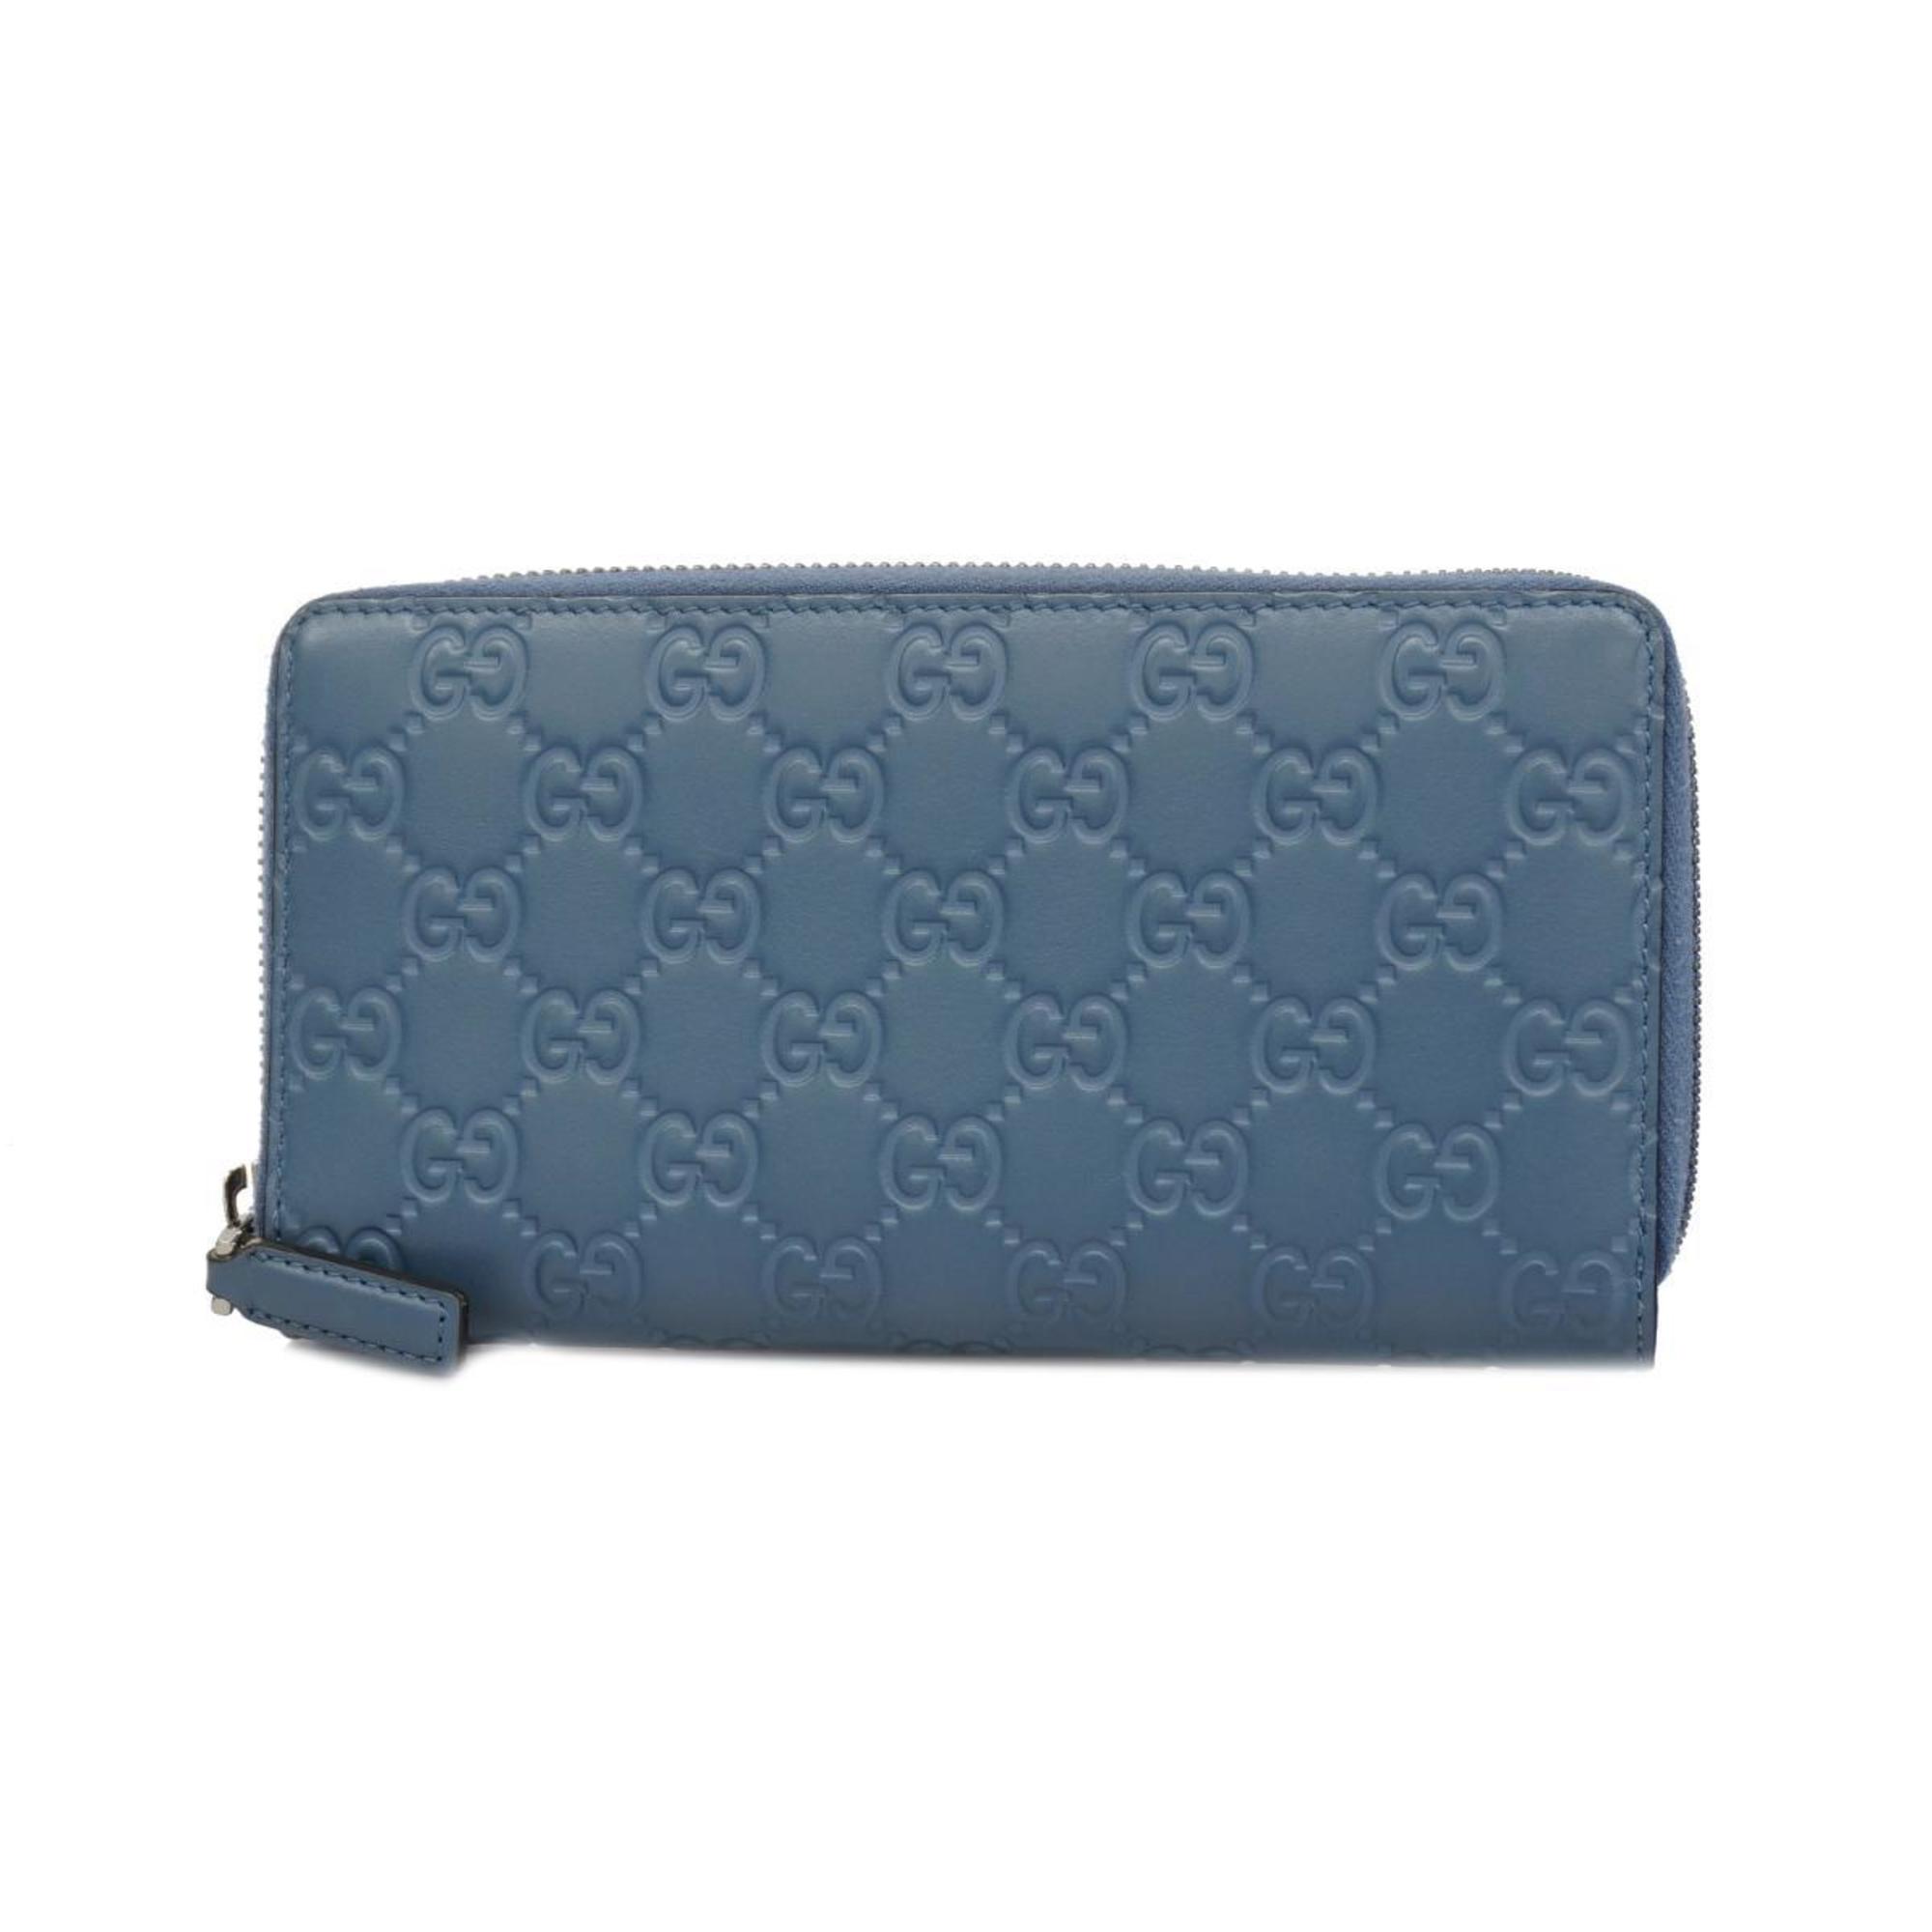 Gucci Long Wallet Guccissima 307987 Leather Blue Women's